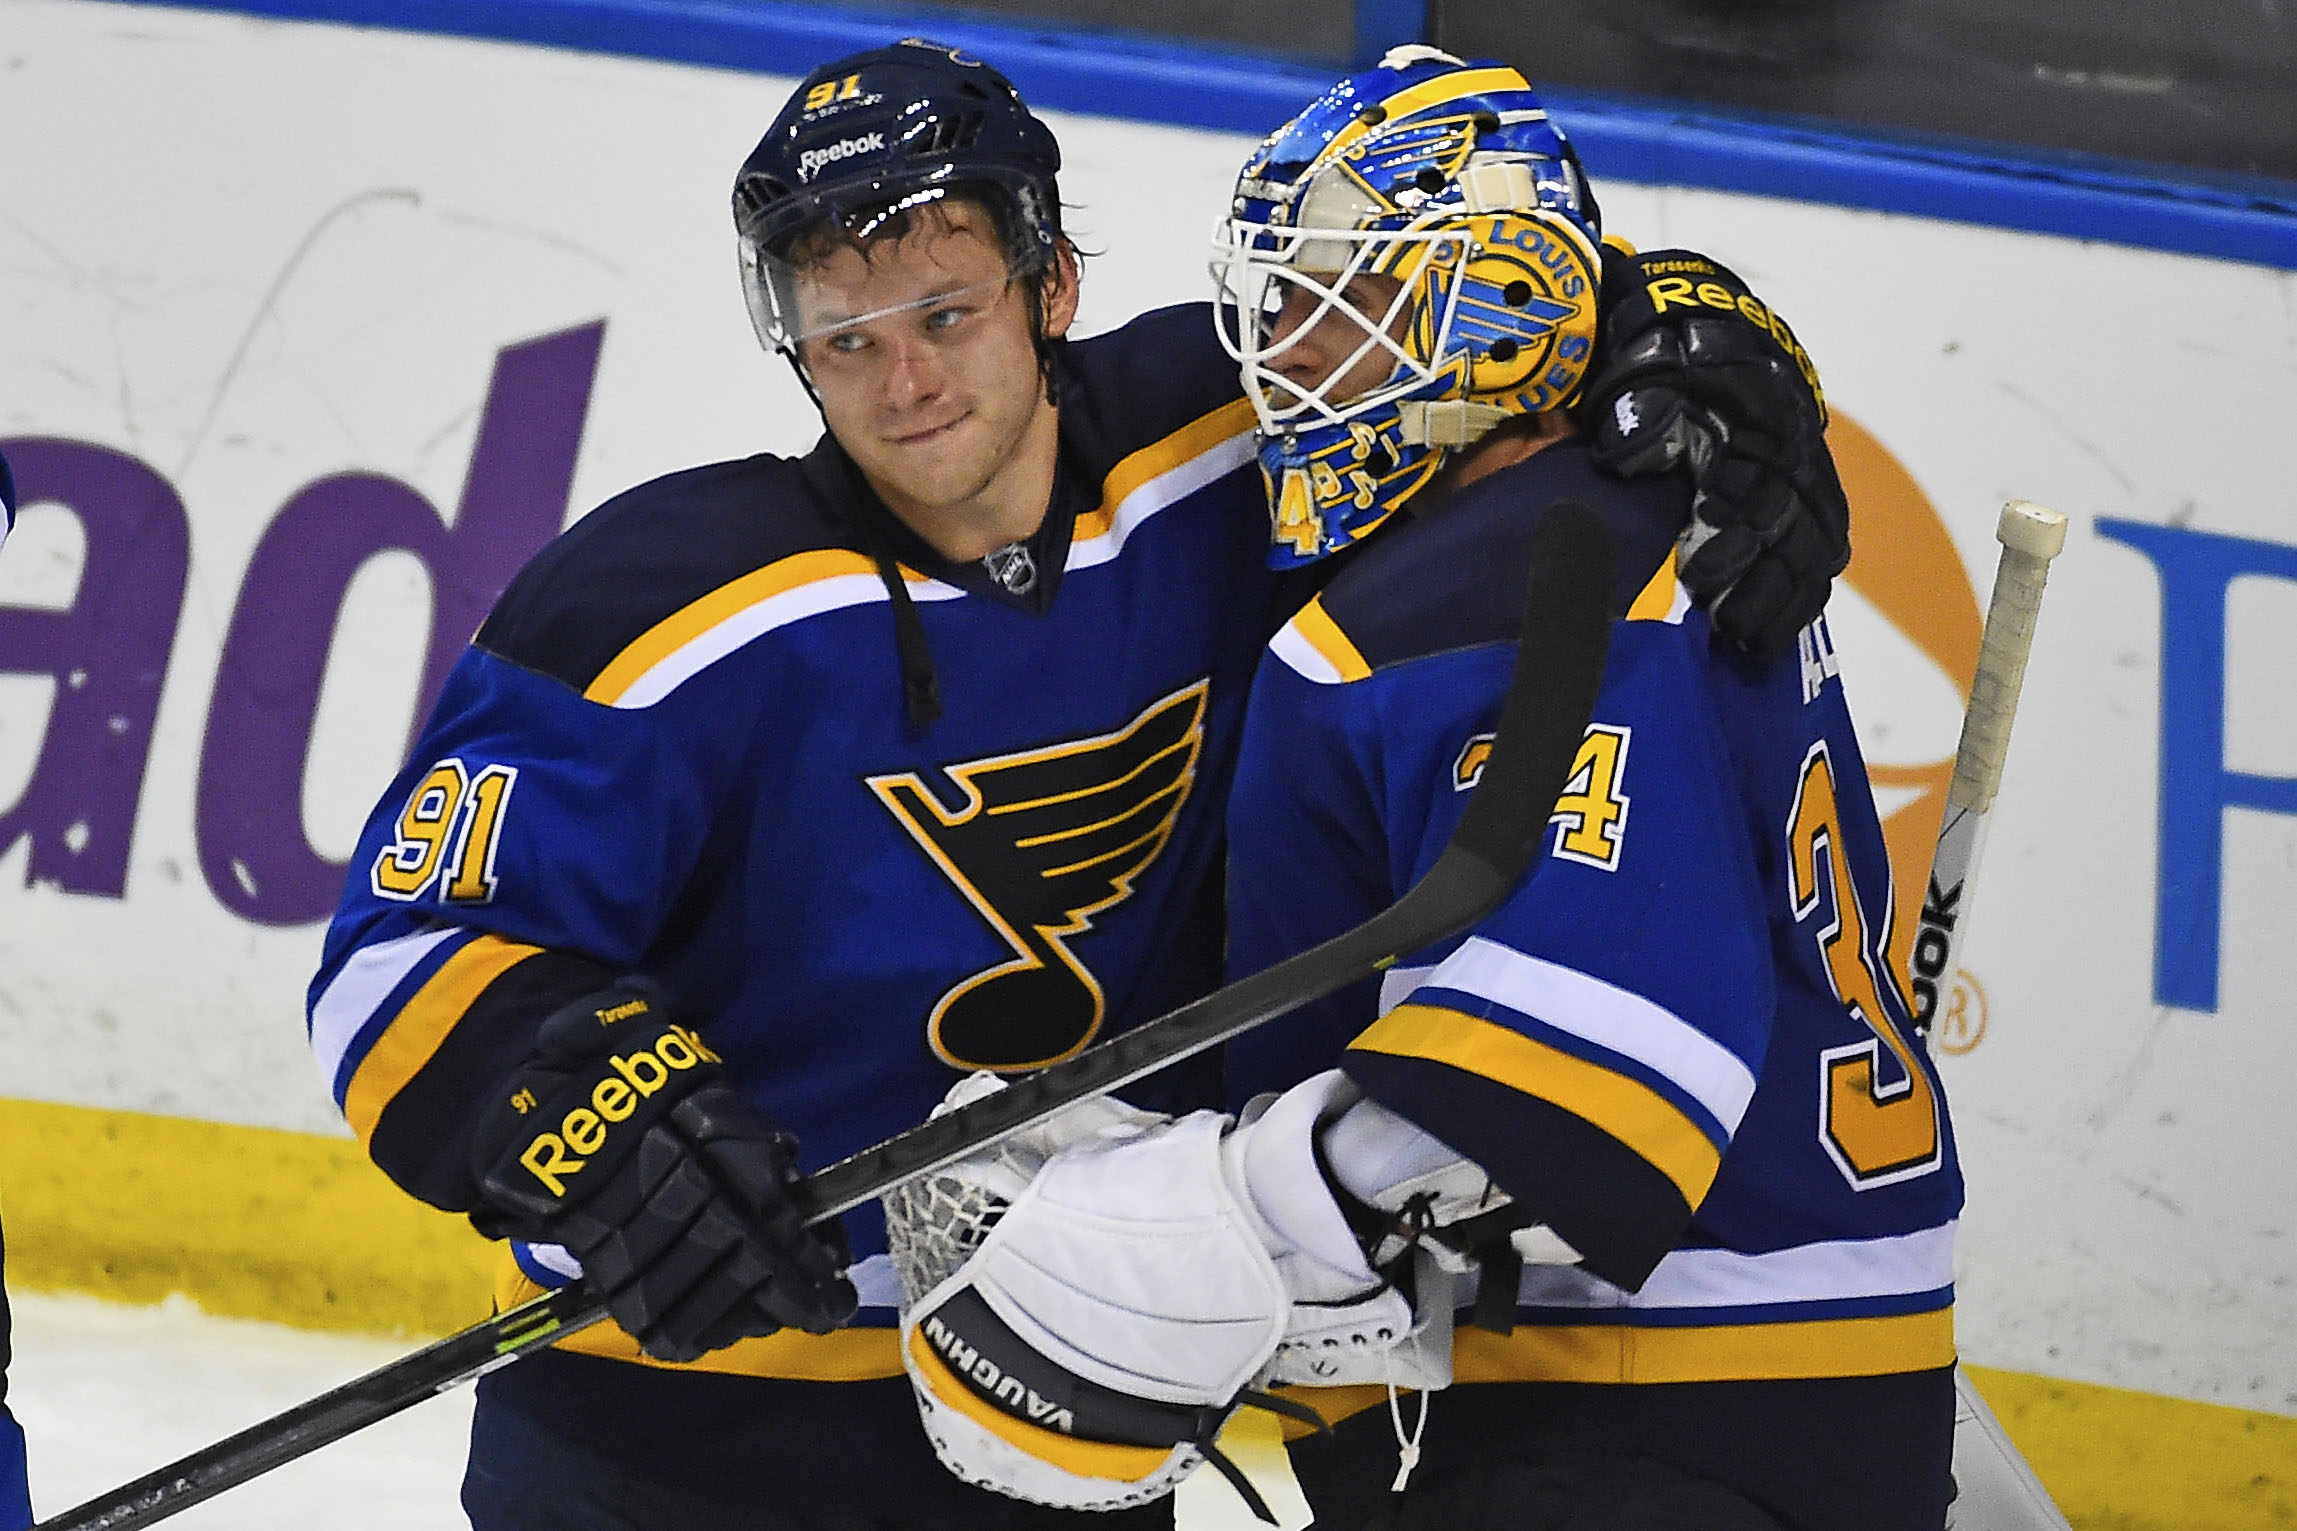 T.J. Oshie scores twice as Blues roll past Kings